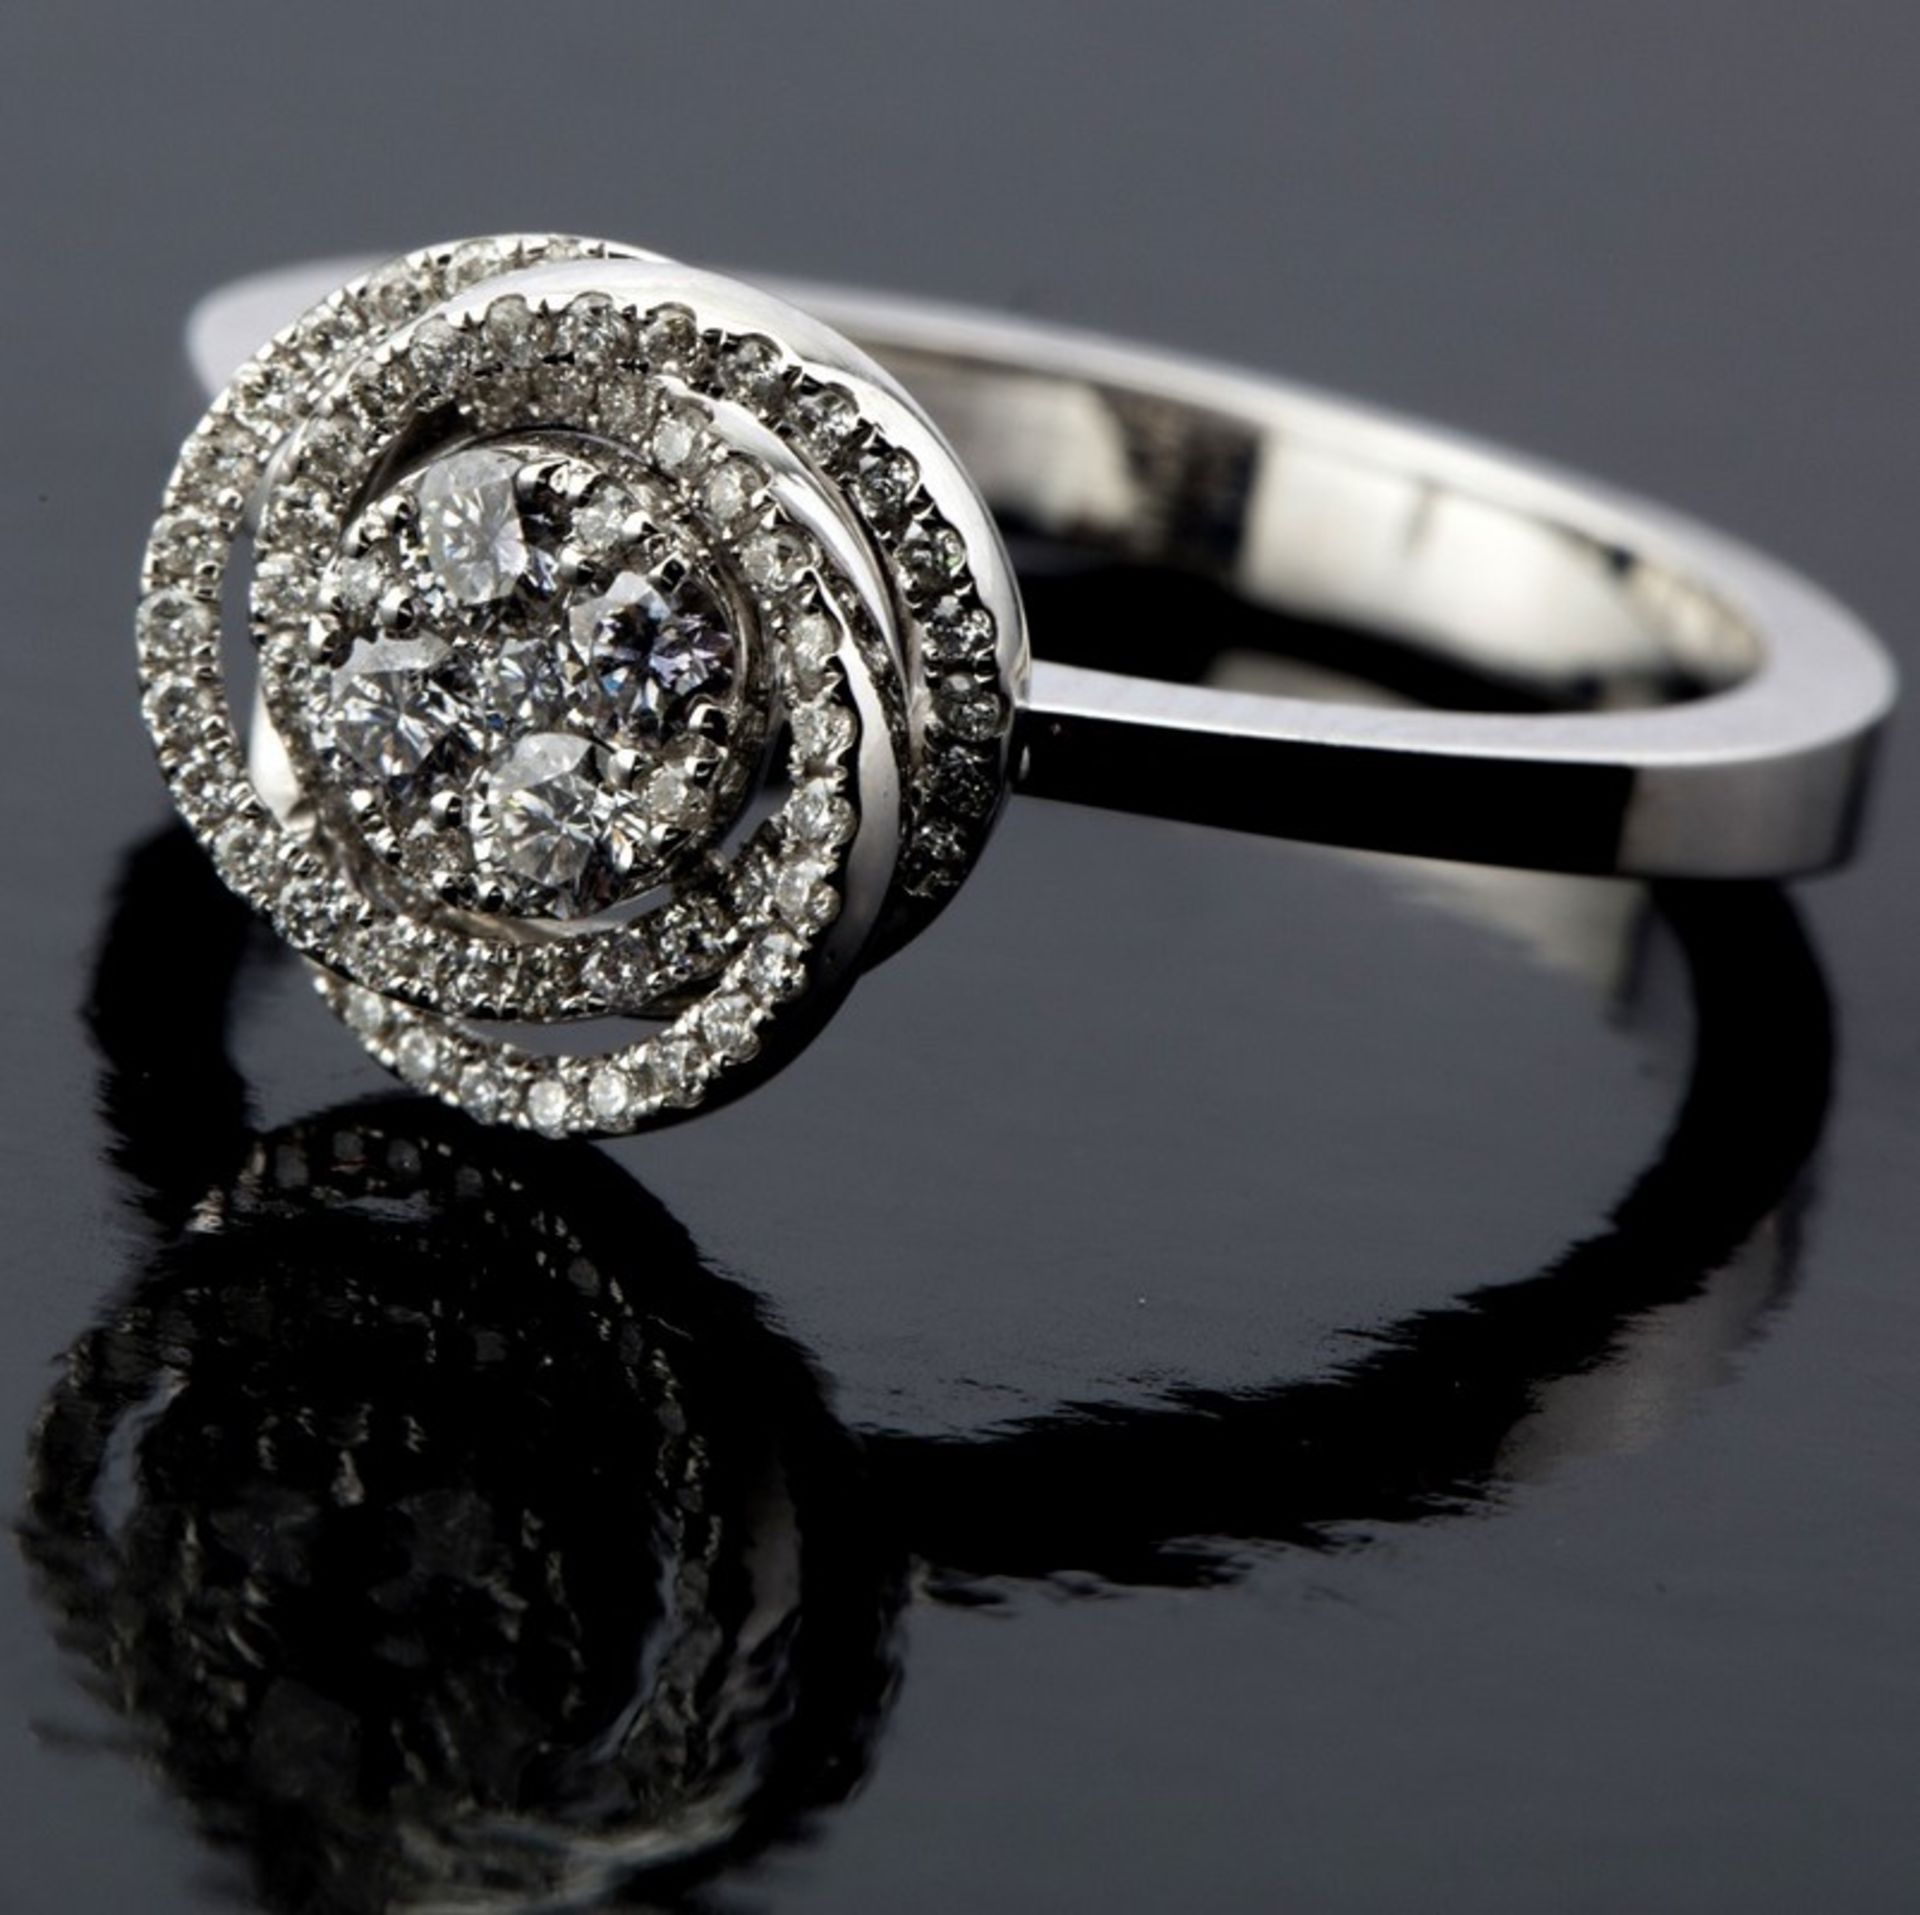 Certificated 14K White Gold Diamond Ring - Image 2 of 7